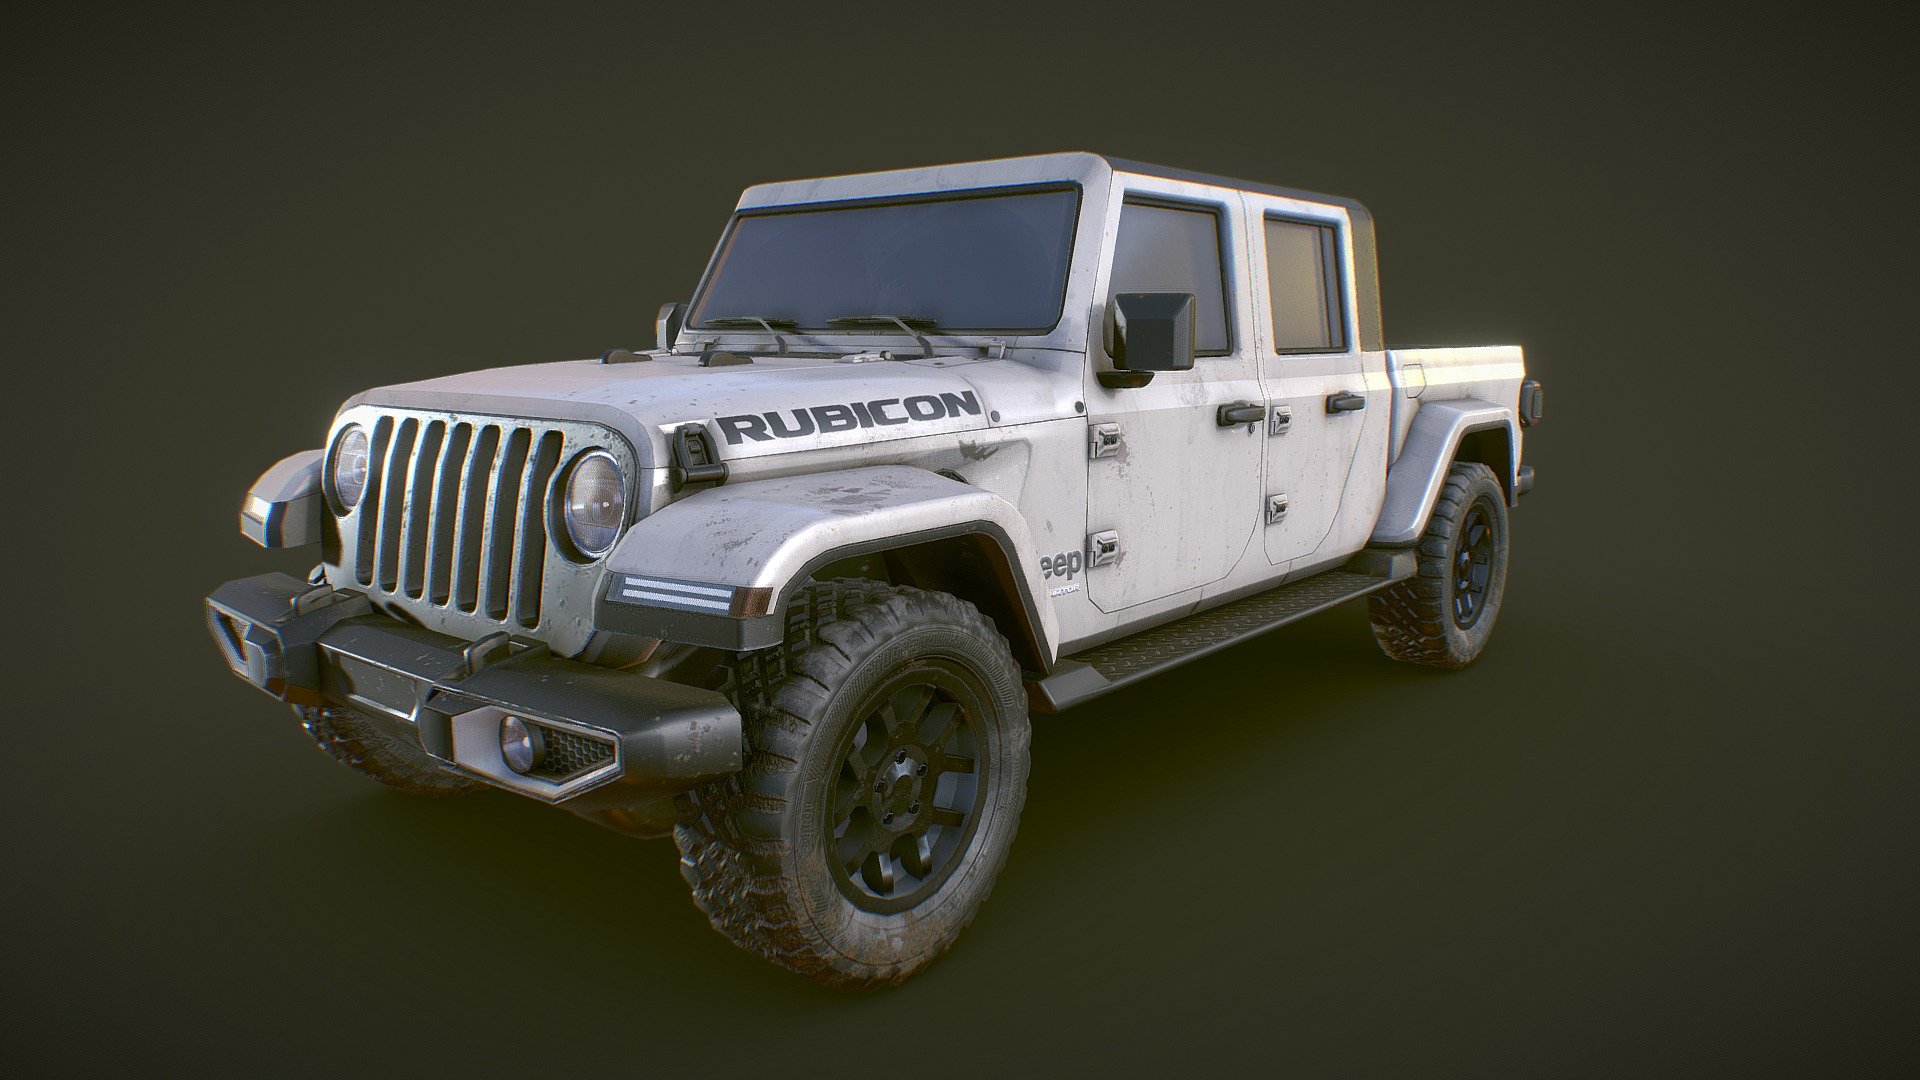 The Jeep Gladiator is a midsize pickup truck manufactured by the Jeep division of Stellantis North America (formerly FCA US). It was introduced at the 2018 Los Angeles Auto Show on November 28, 2018, and went on sale in the spring of 2019. Based on the same platform as the Wrangler JL, the Gladiator is Jeep's first pickup truck since the Comanche was discontinued in 1992 3d model